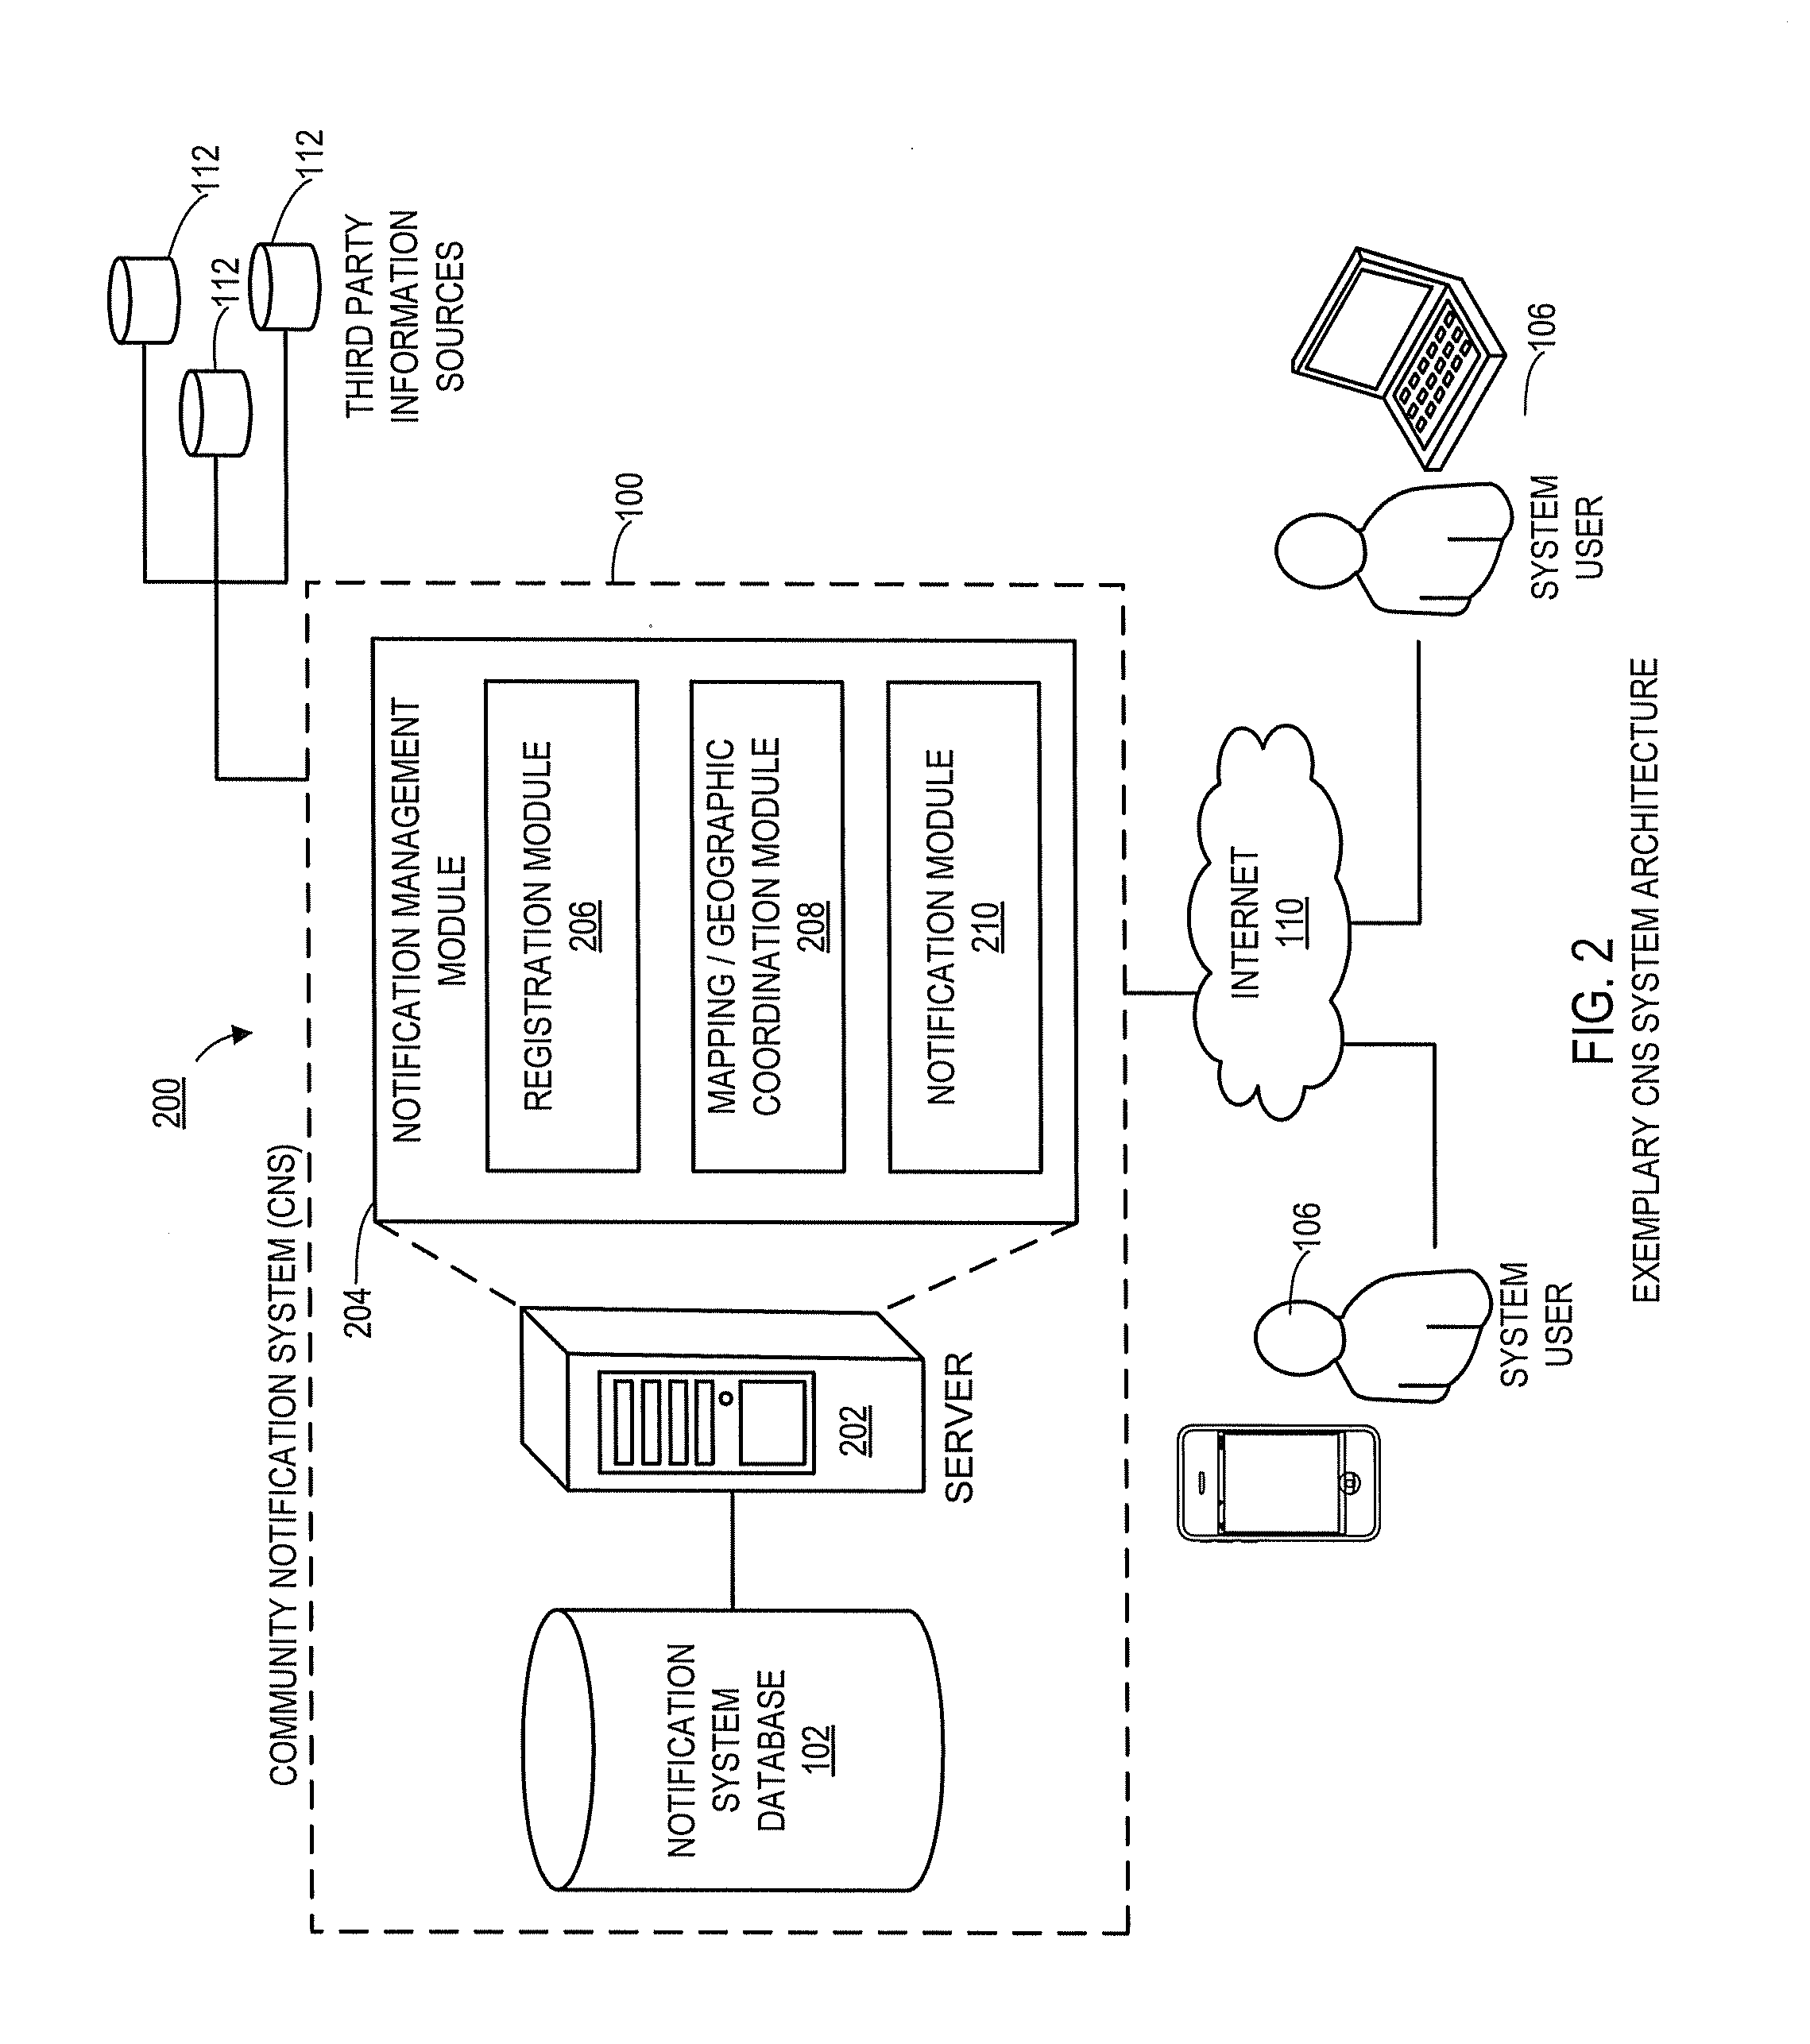 Systems and methods for notifying proximal community members of an emergency or event